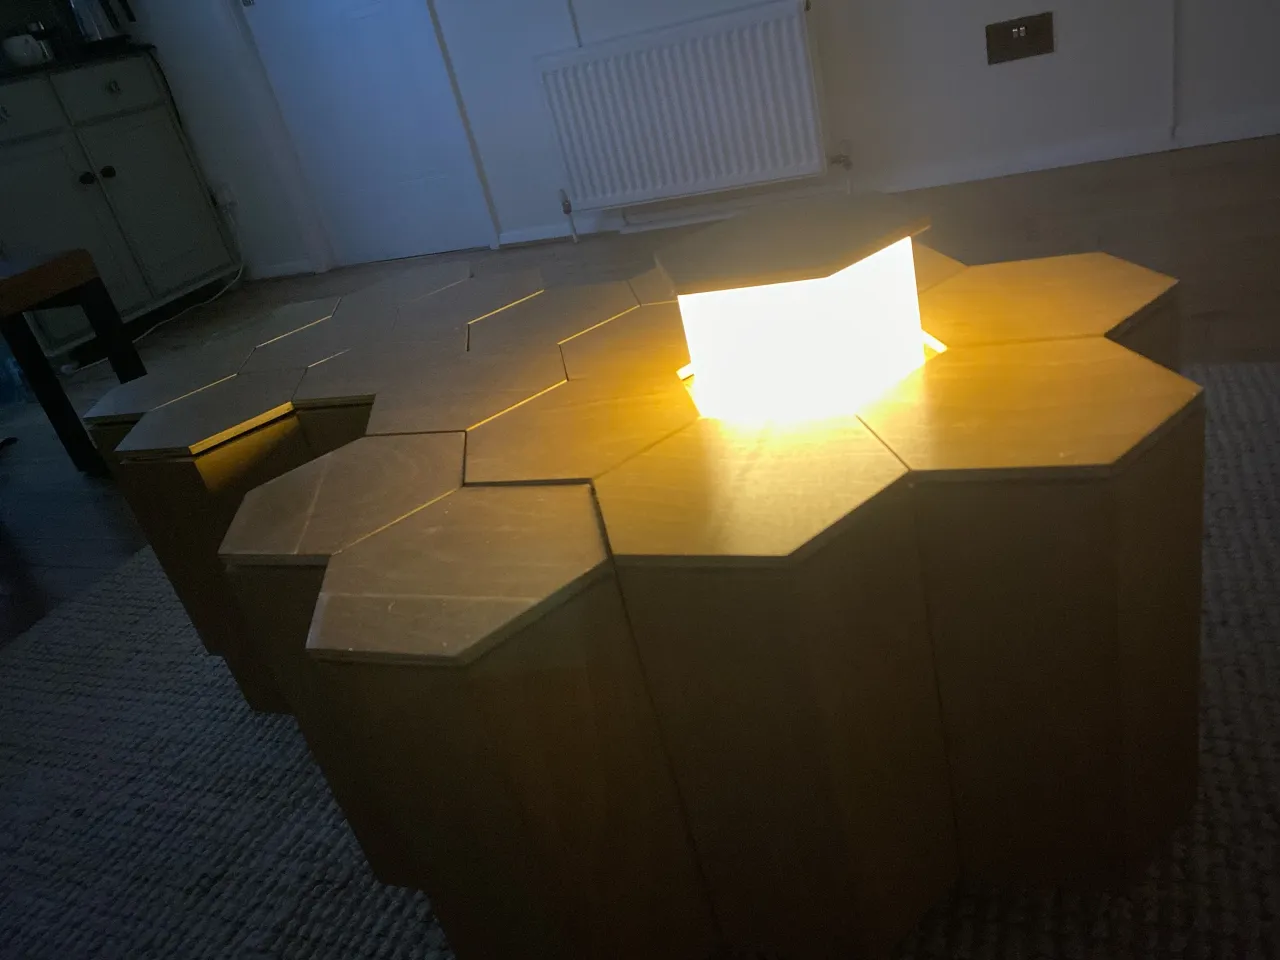 Modular honeycomb coffee table with built-in storage and pop-up